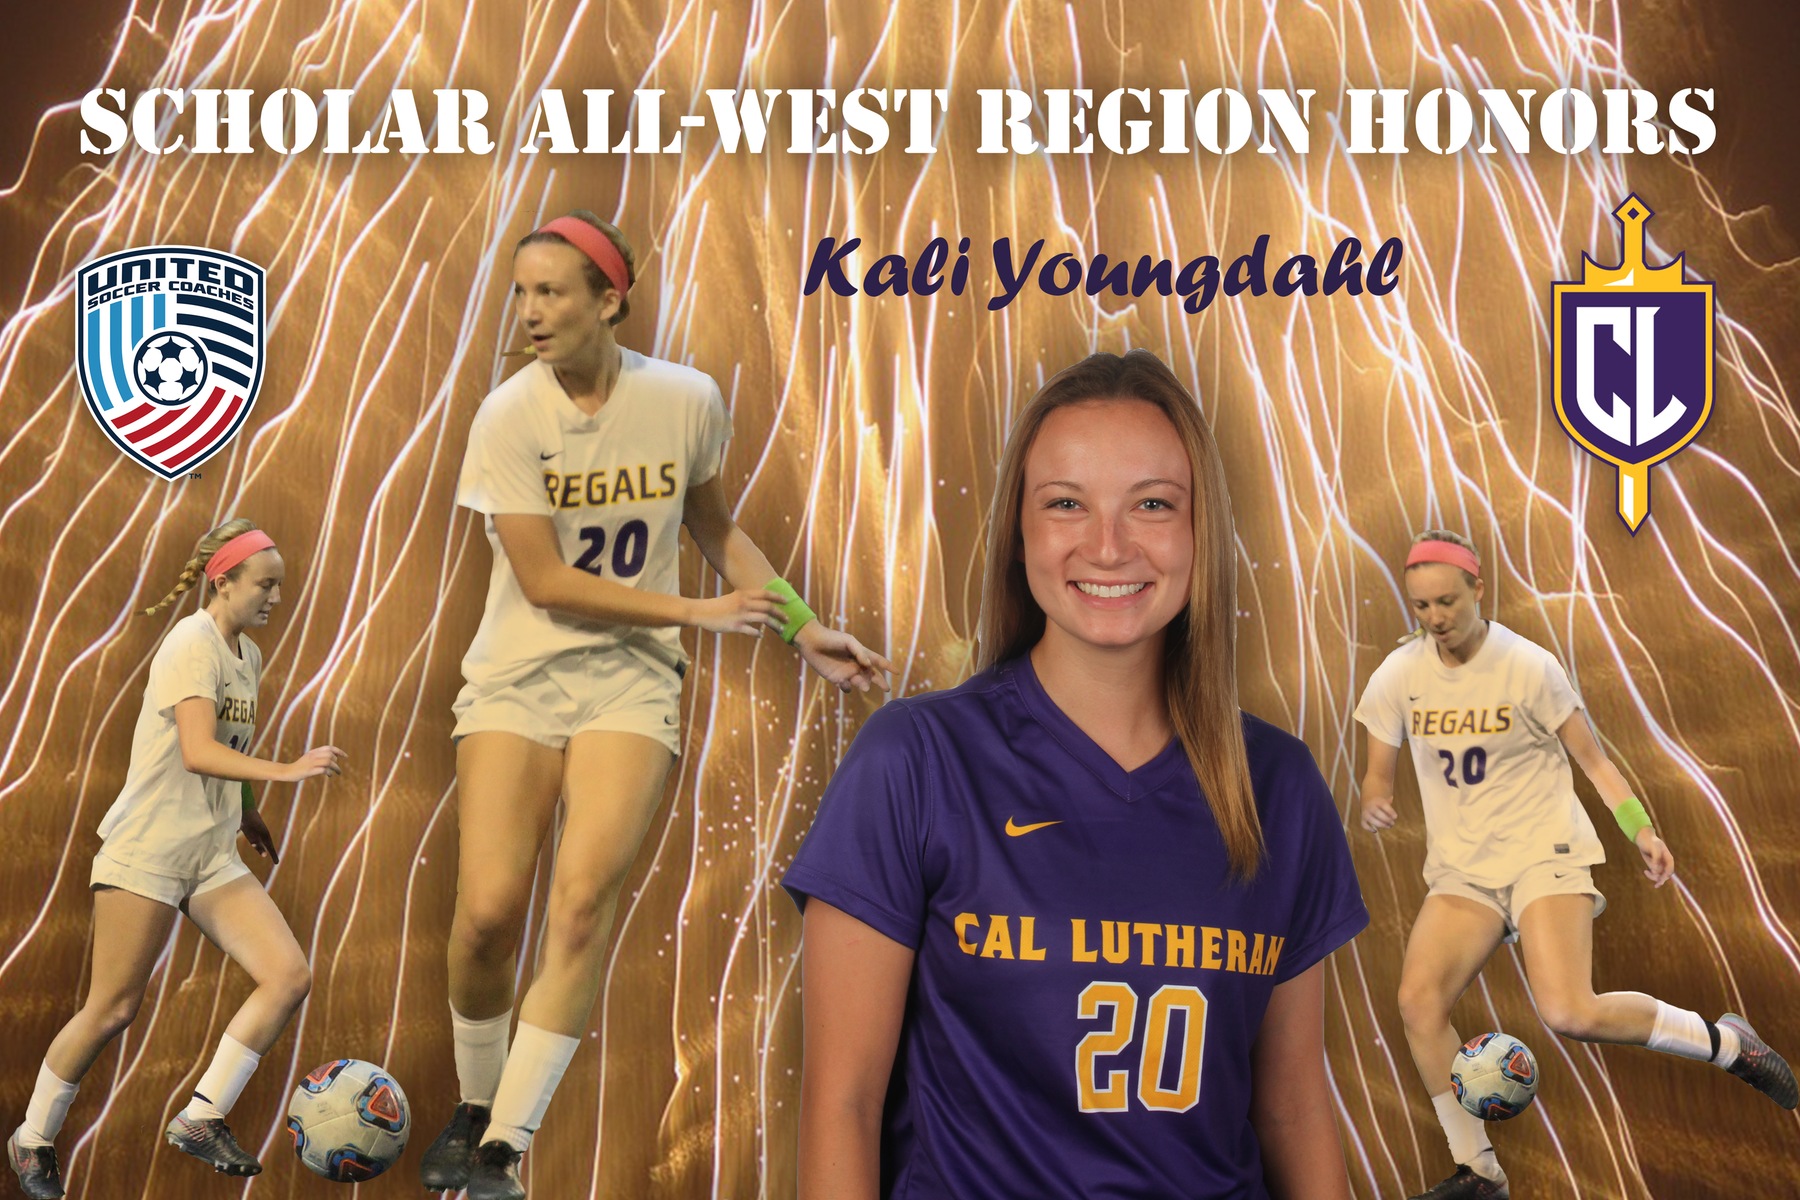 Youngdahl Earns Scholar All-West Region Honors